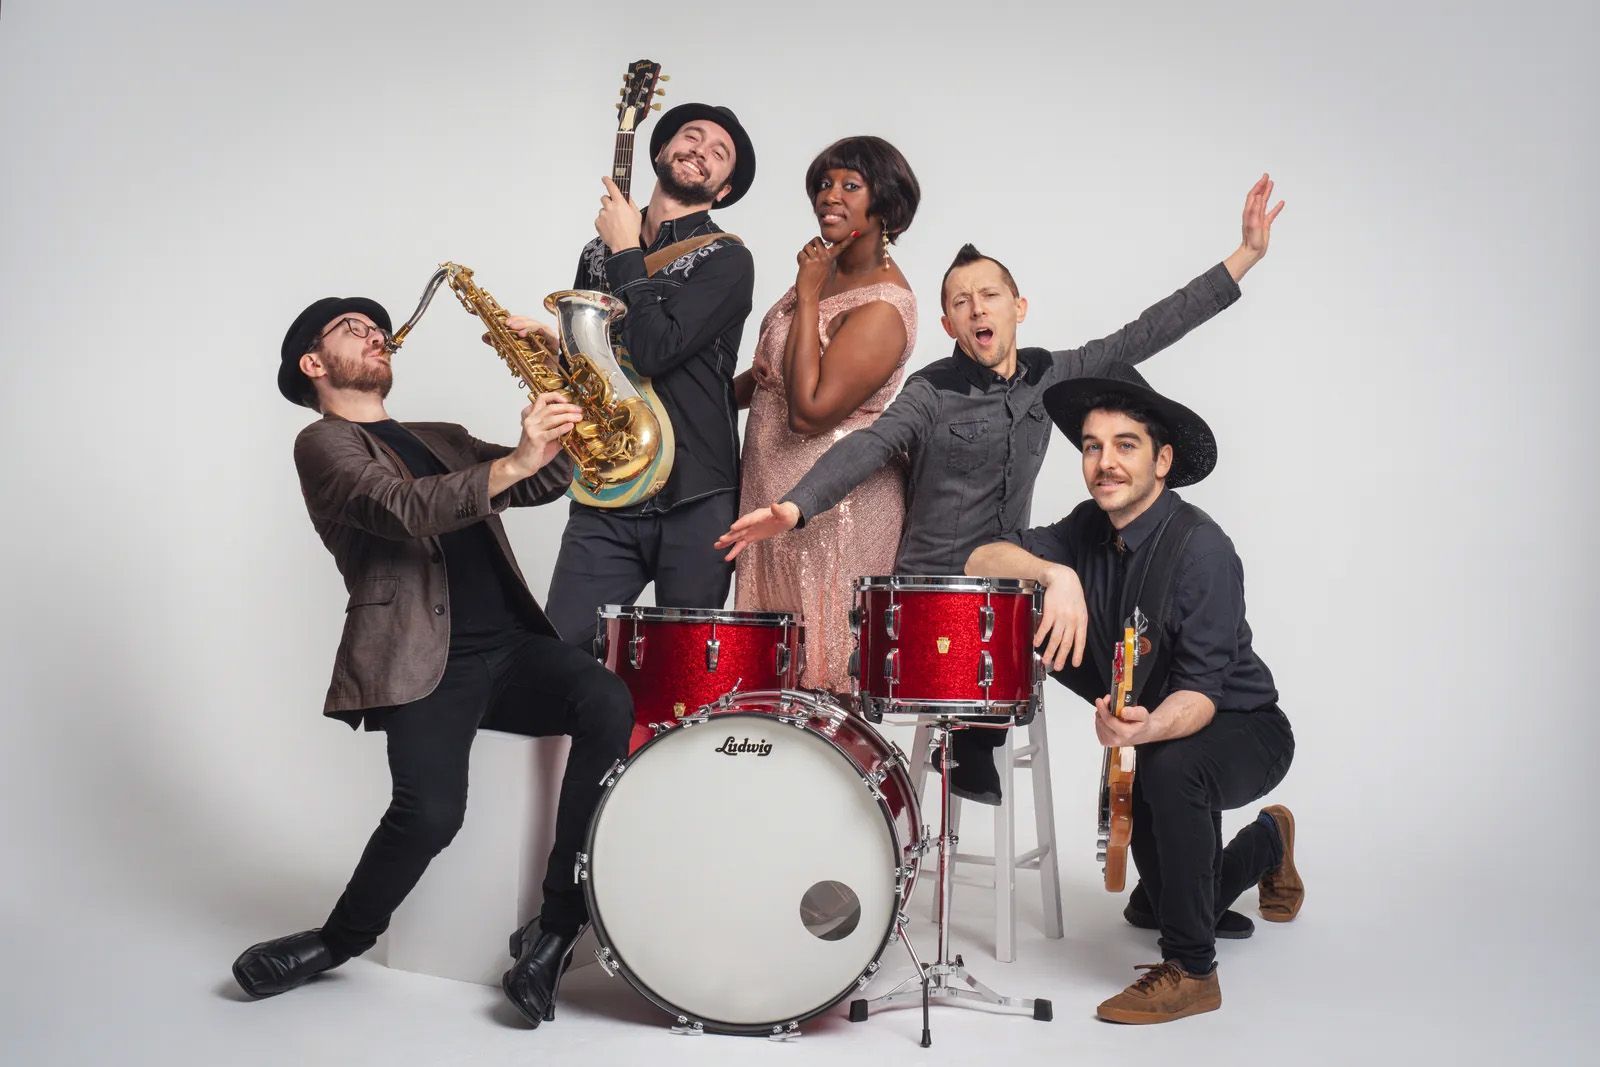 Photo of the Sugar Darlings, may contain a saxophone, drums, a woman and four men